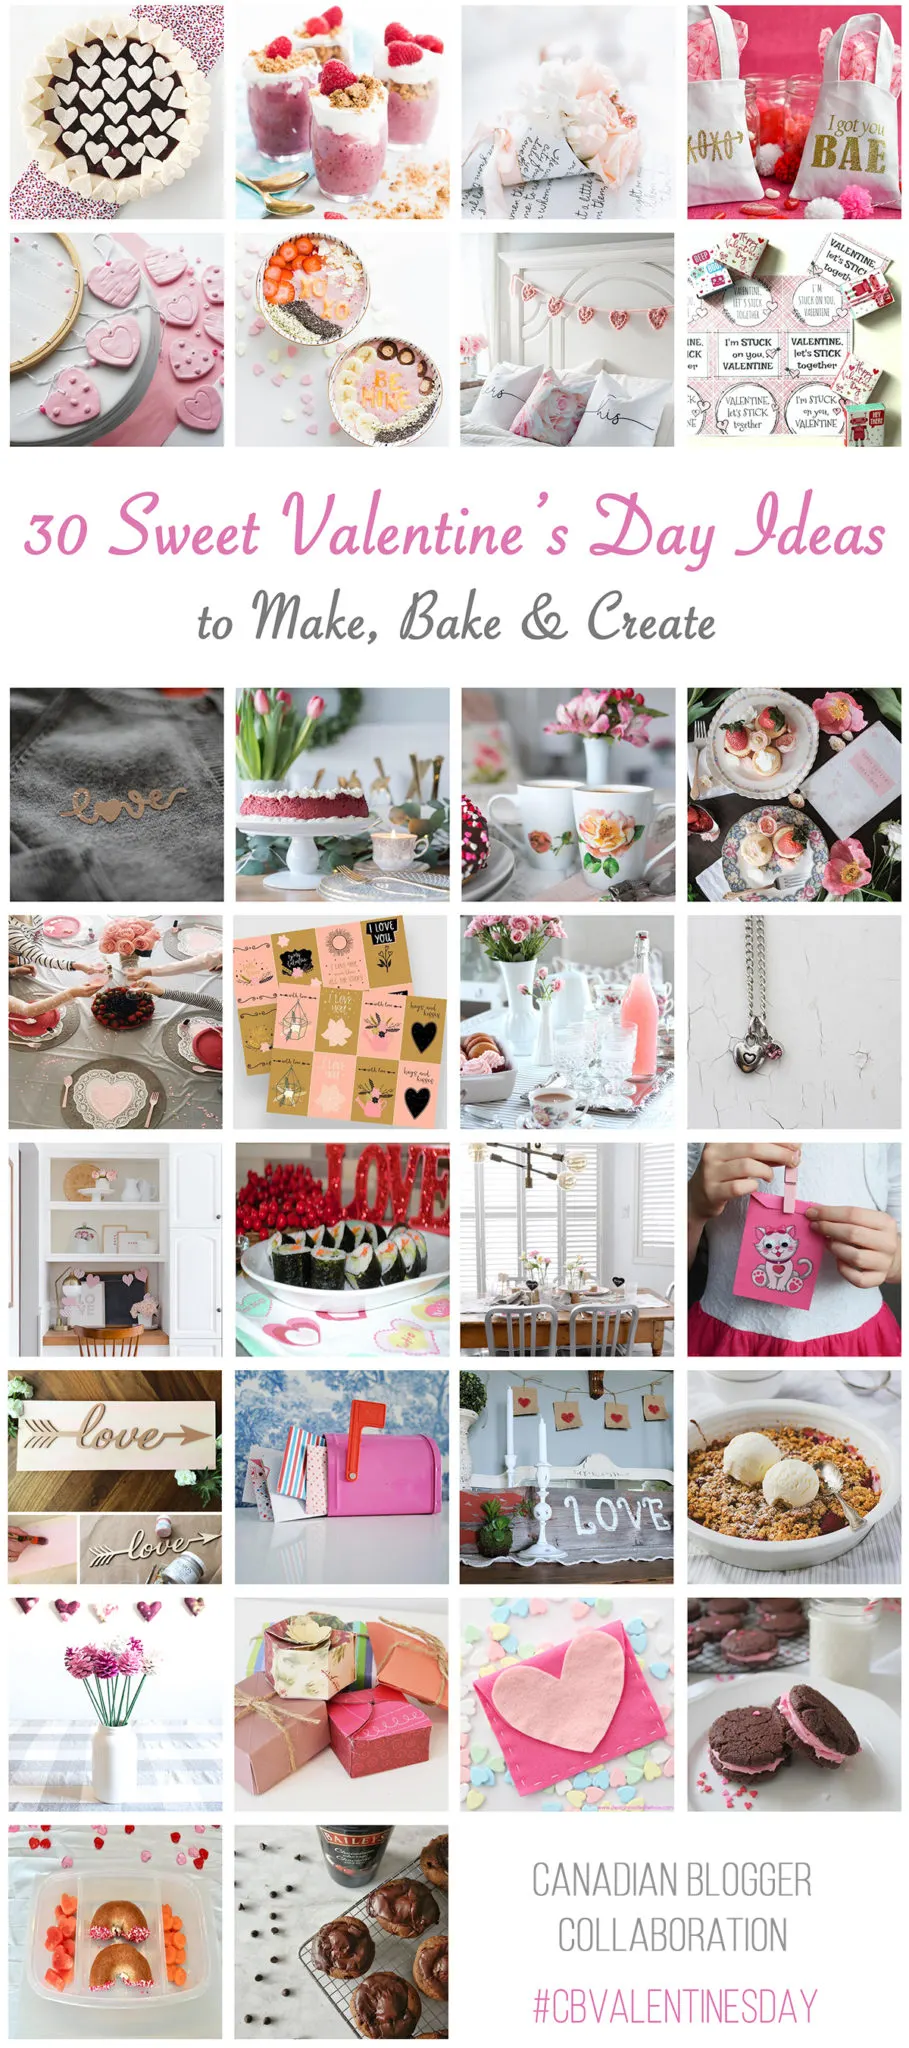 Collage of 30 Valentine's Day ideas to make bake and create